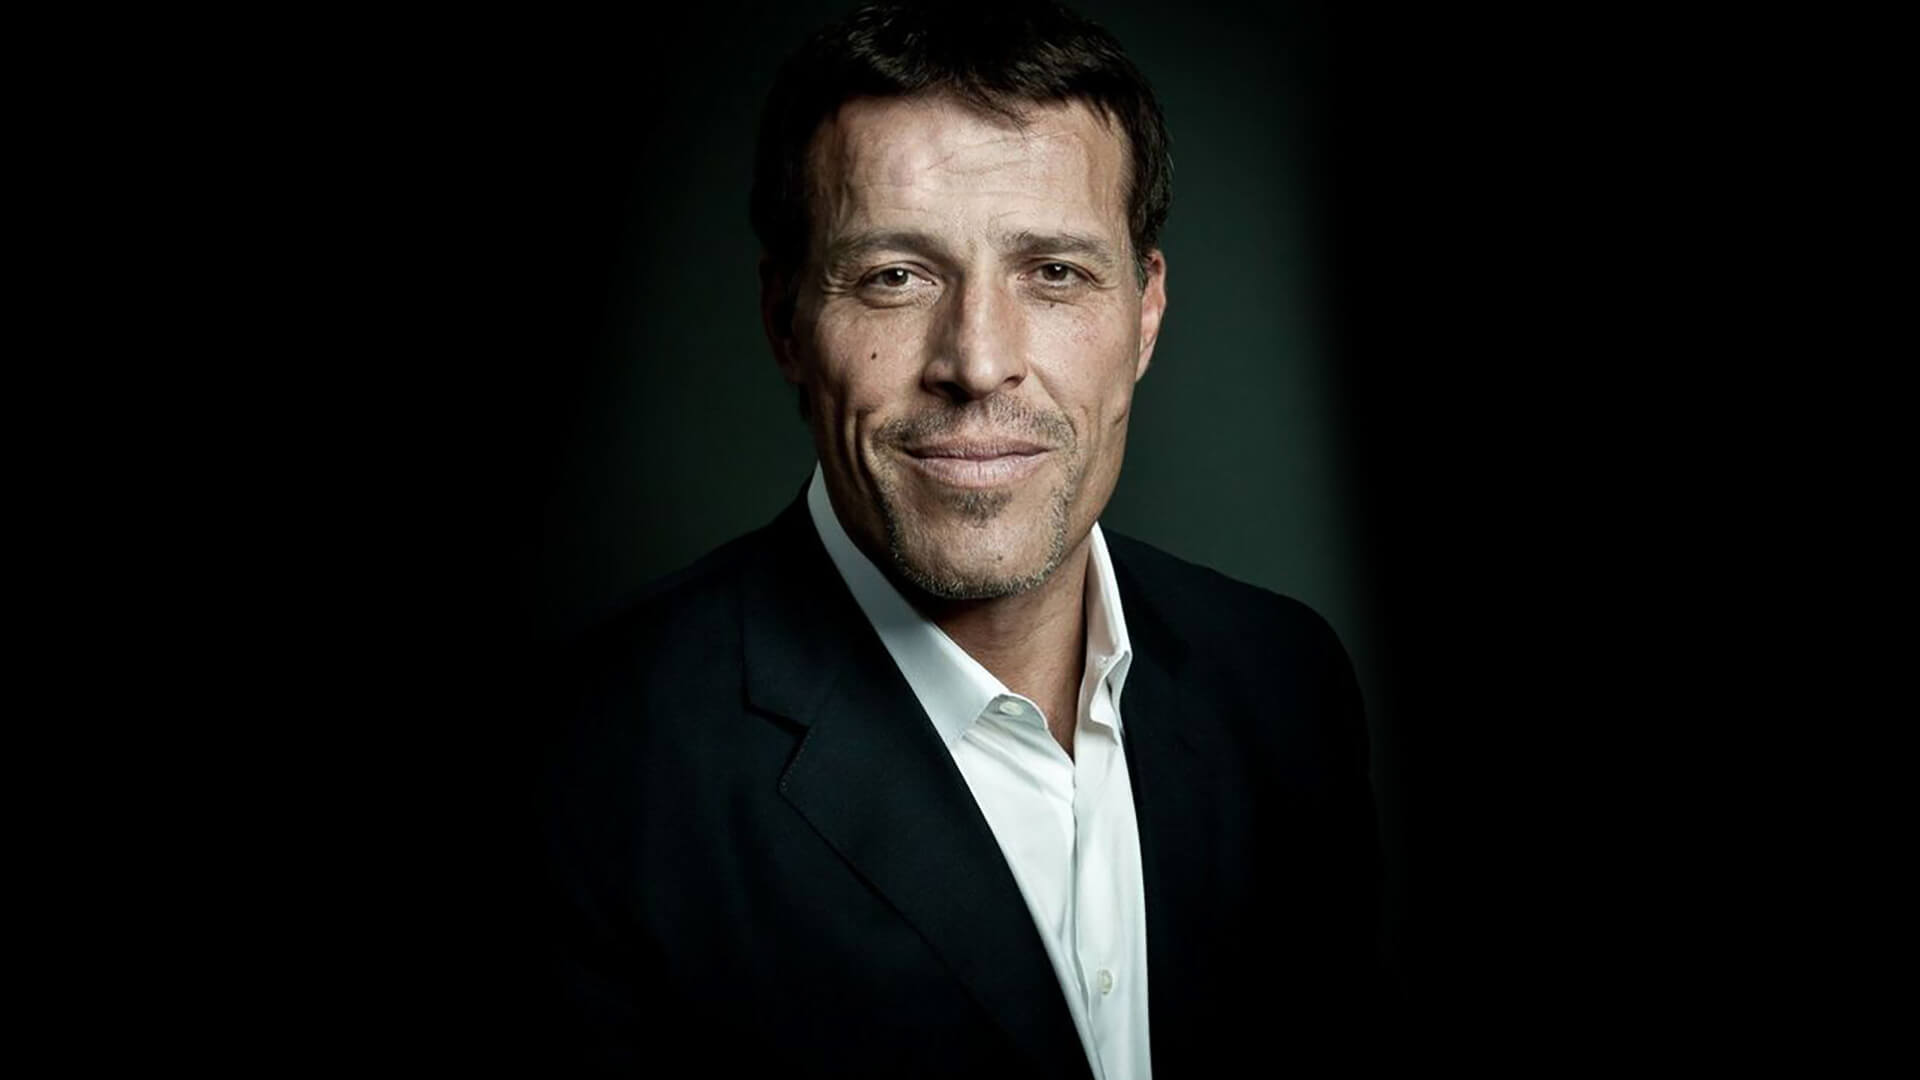 Fast Facts About Tony Robbins and His $500 Million Fortune